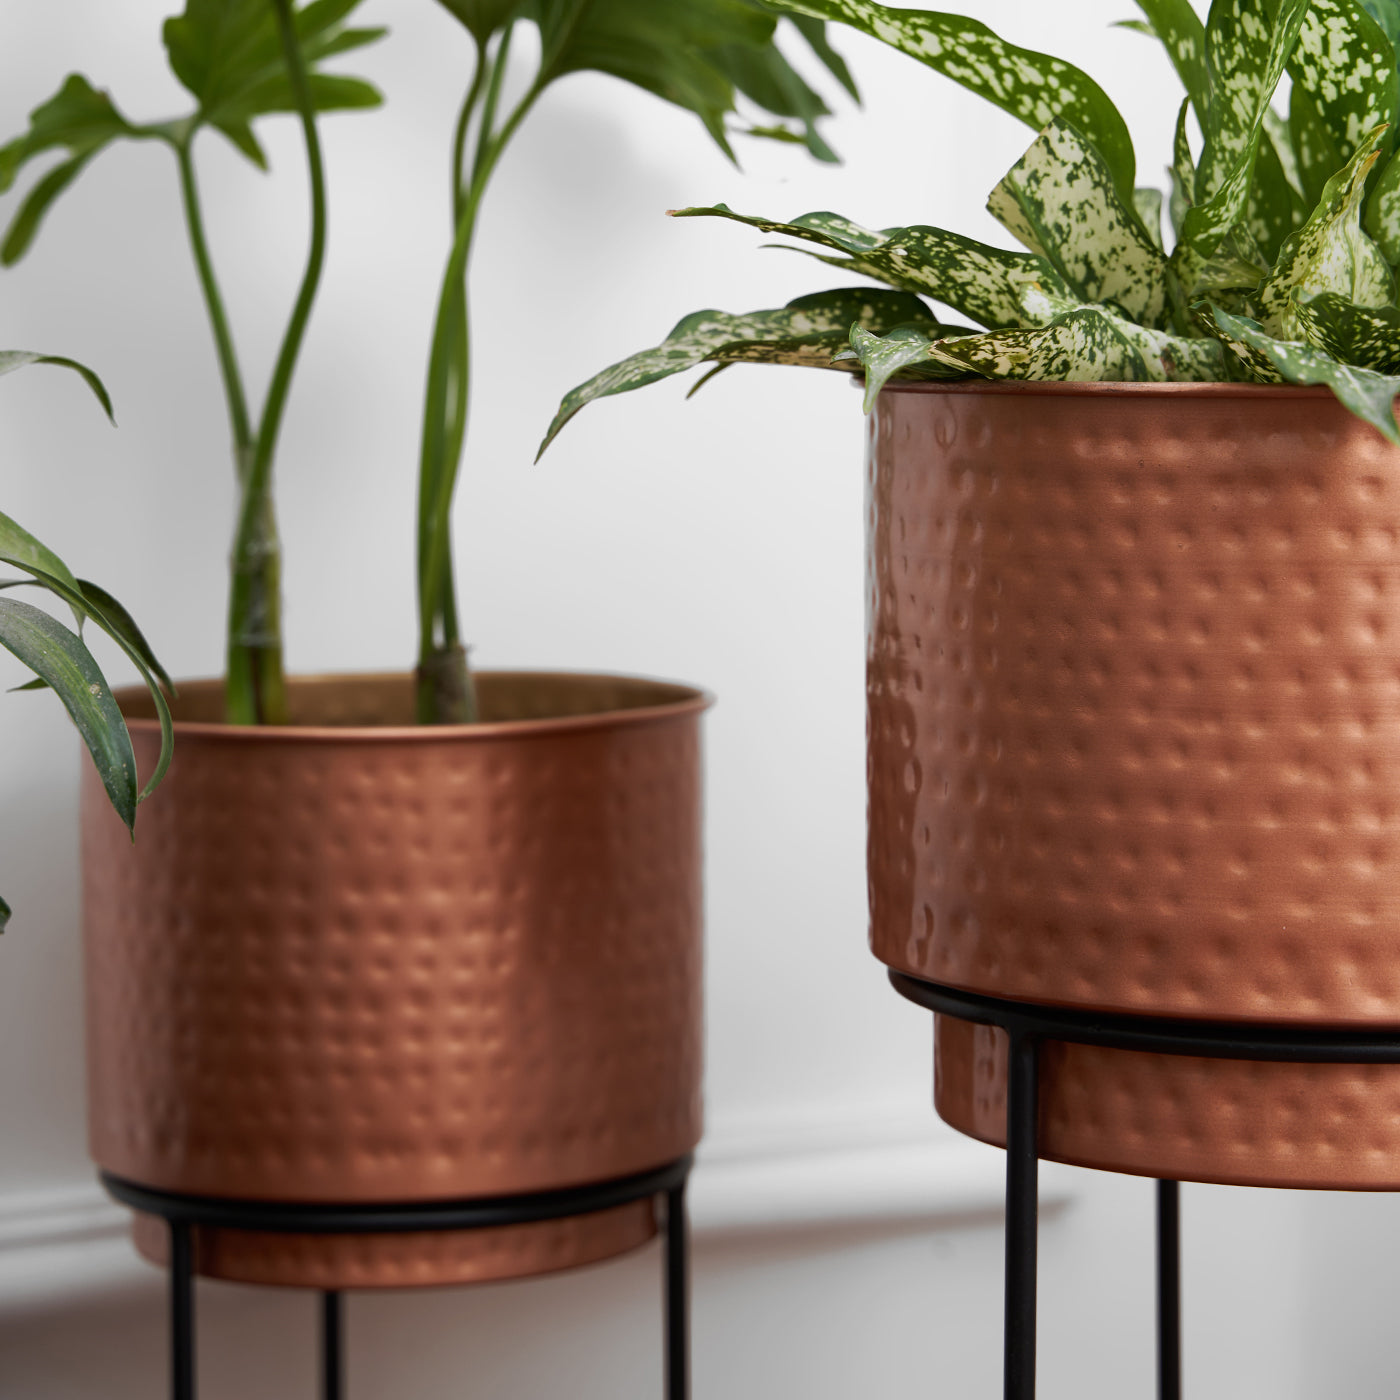 Copper Hammered Metal Planters With Stand (Set of 3)